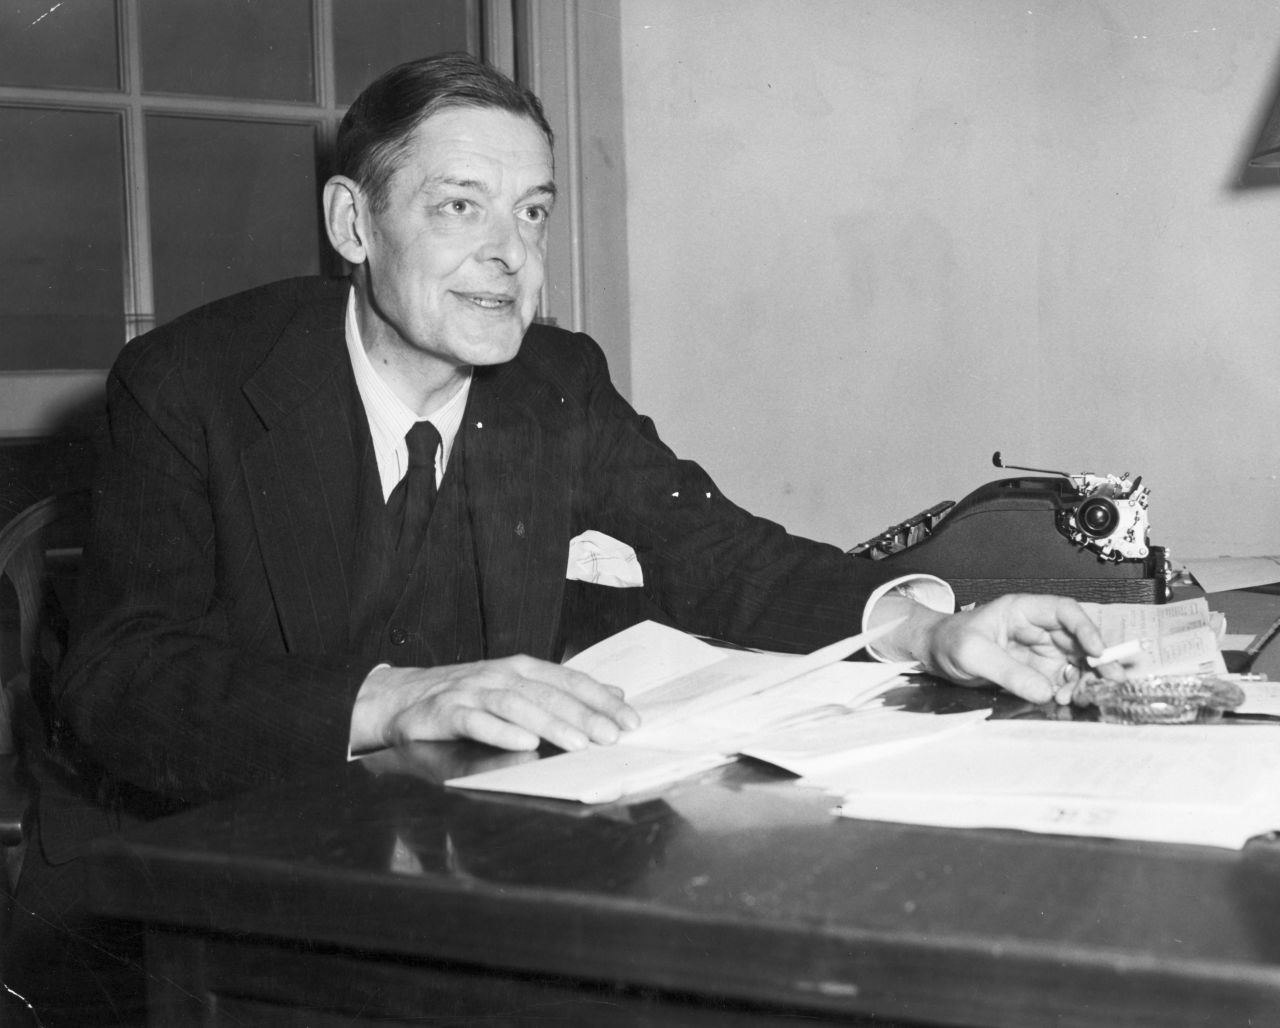 Poet T. S. Eliot inspects manuscripts in this undated photo.